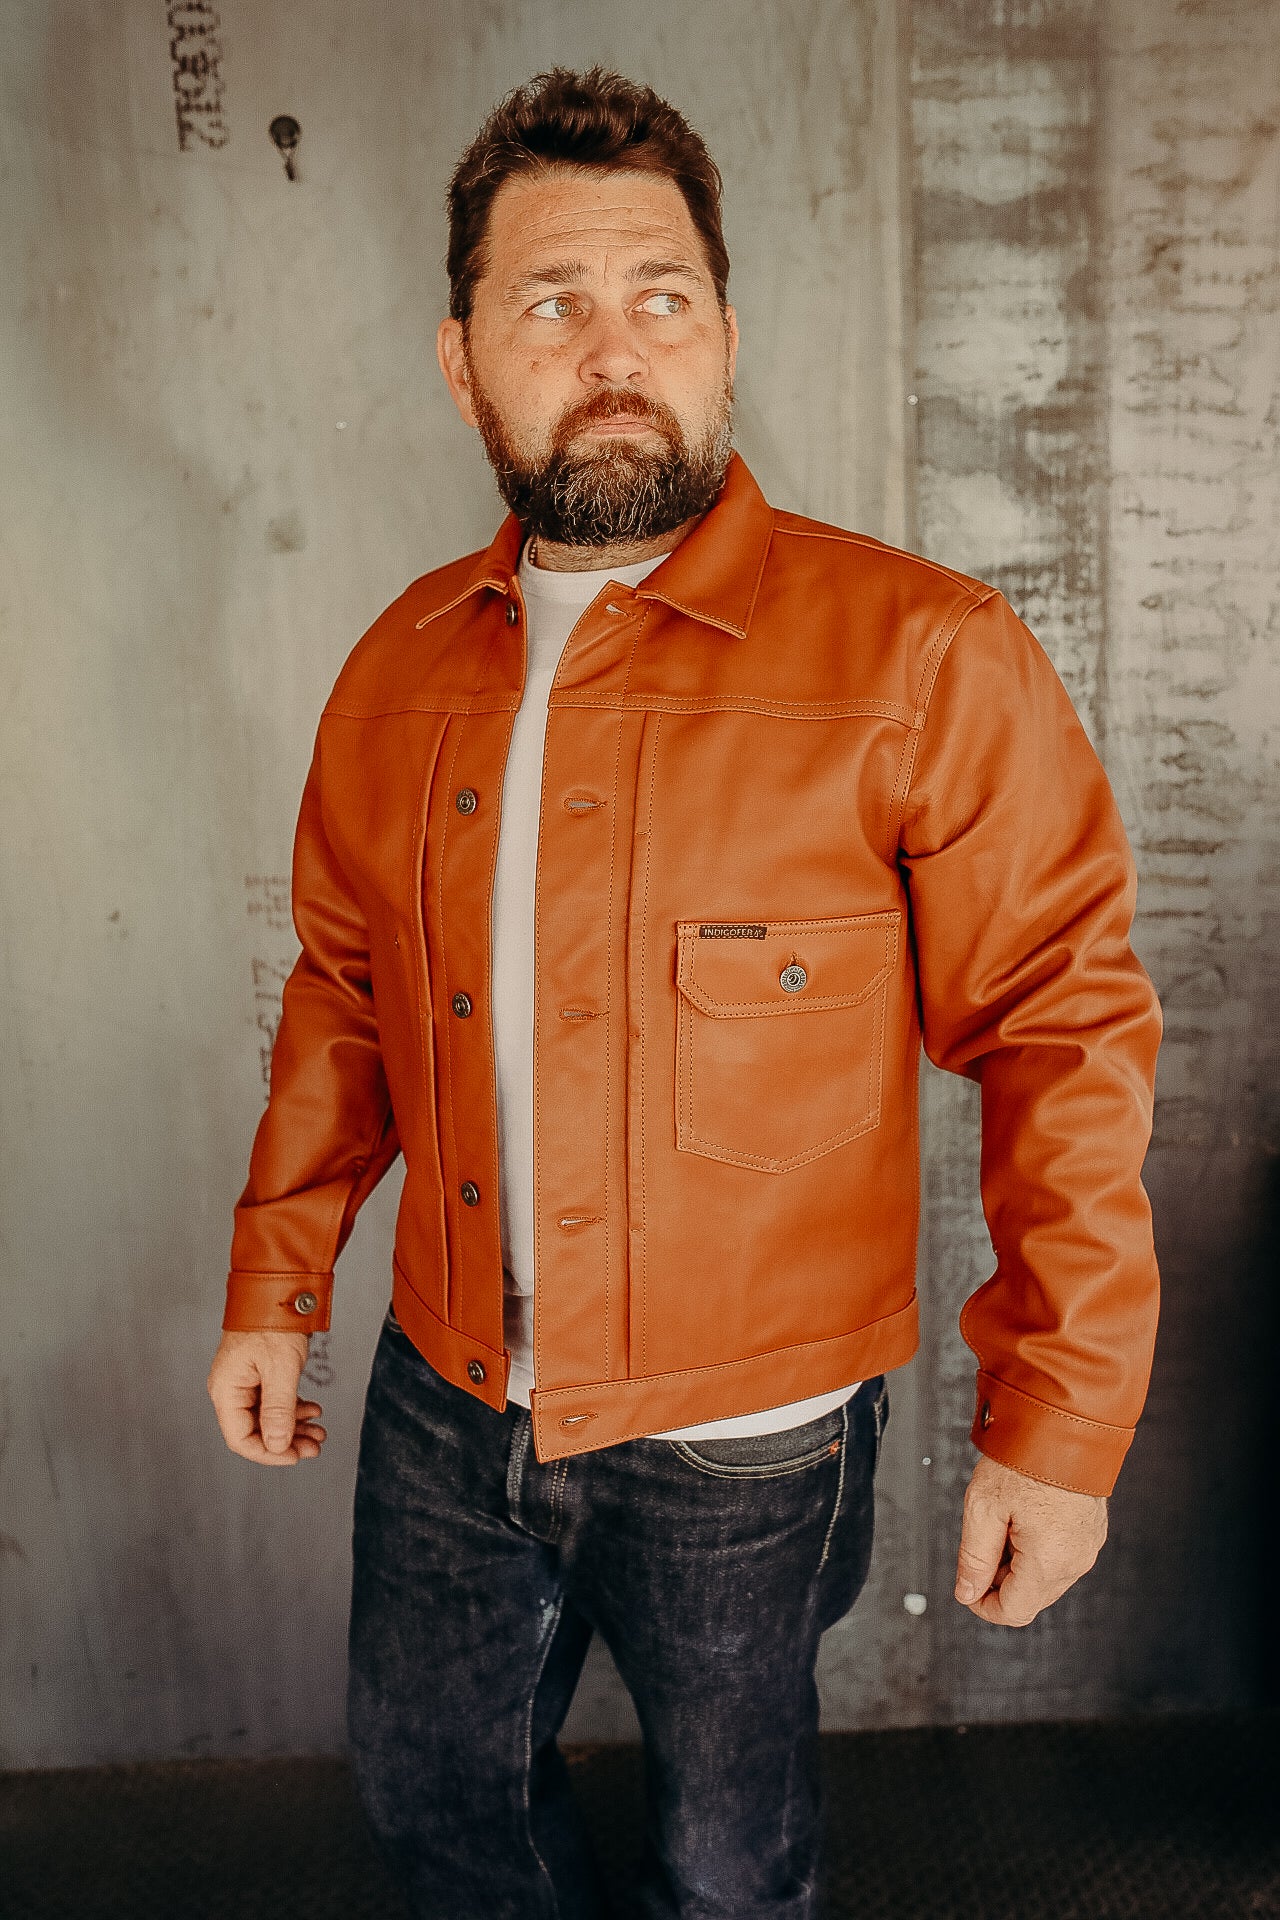 Outerwear Provisions – Iron Shop